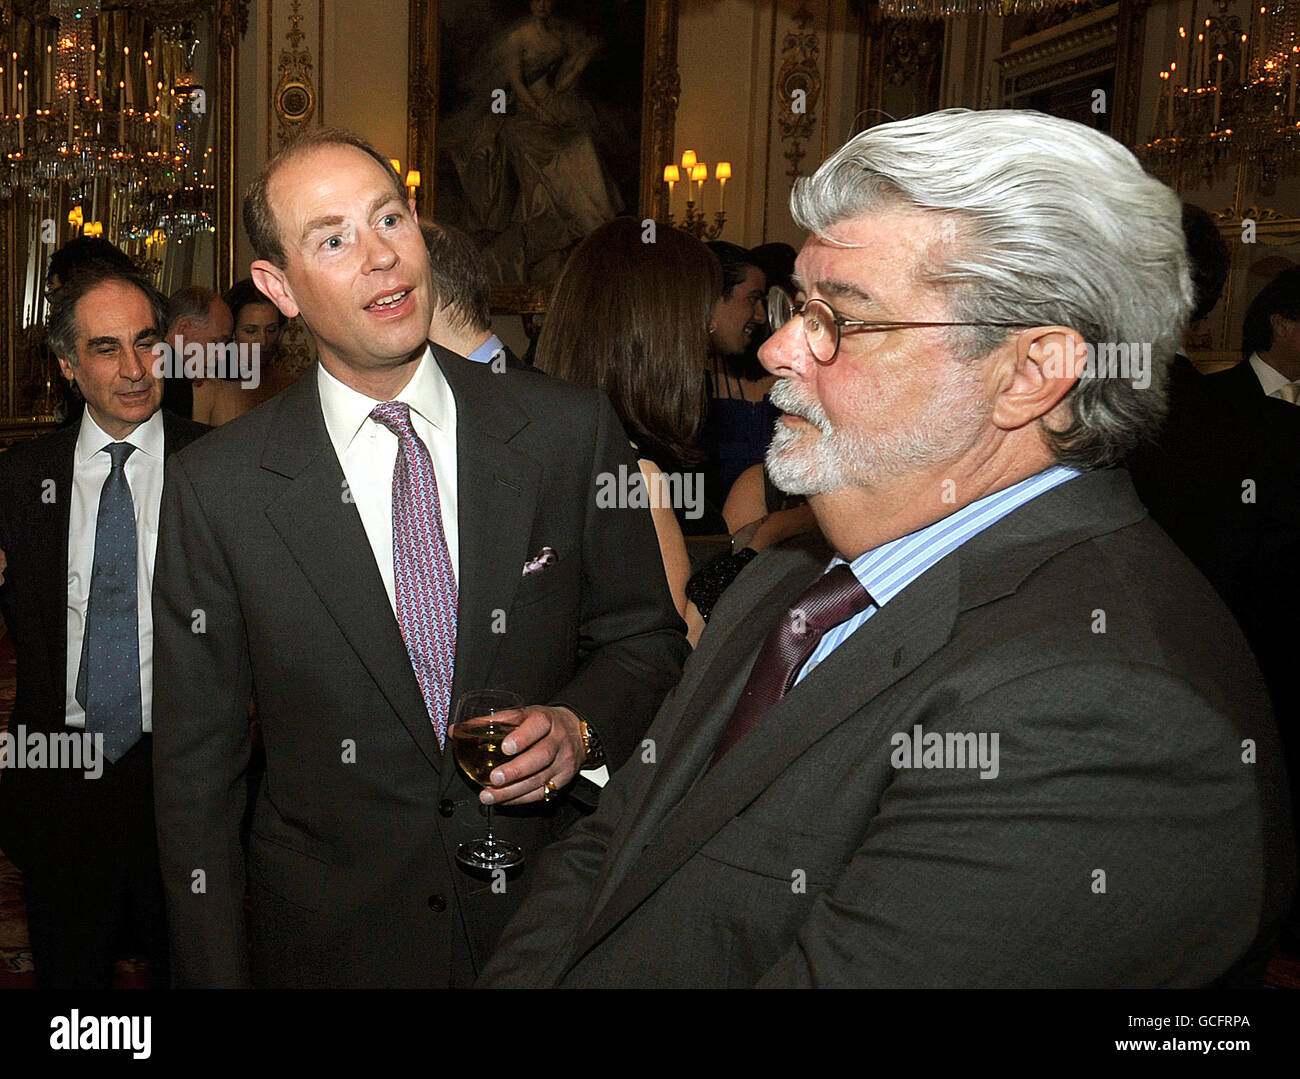 The Earl of Wessex meets Star Wars director George Lucas (right) at a drinks reception for the 'Film without Borders' charity at Buckingham Palace in central London. Stock Photo